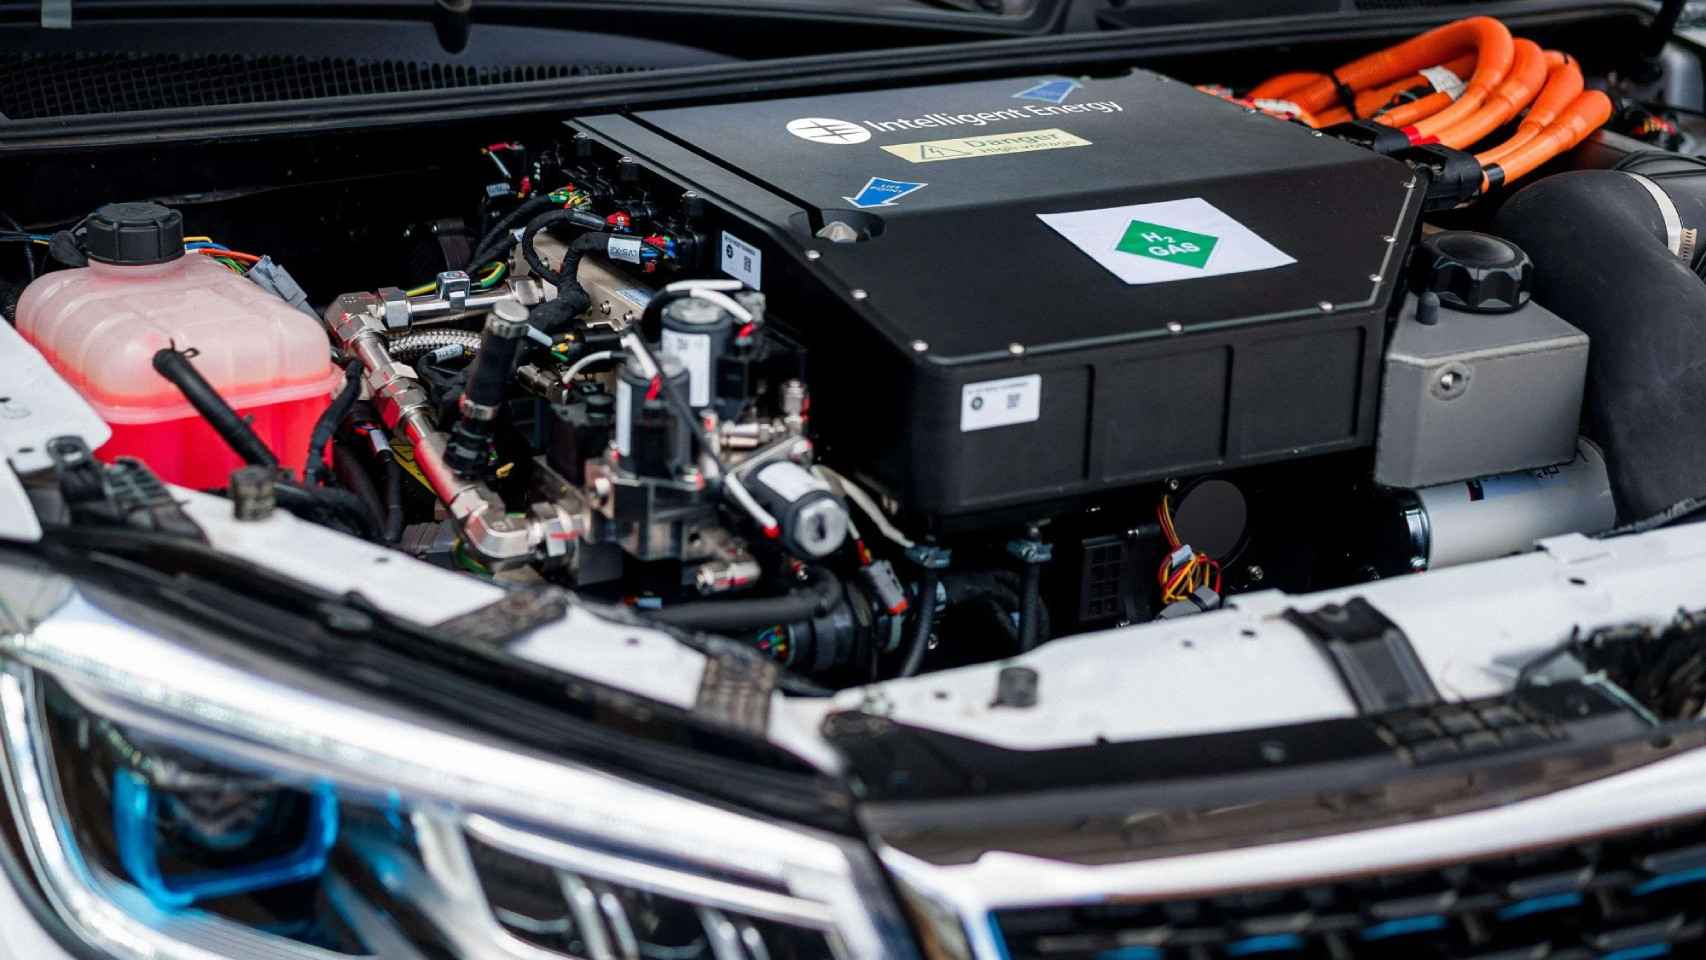 The revolutionary system that has over 200 horsepower with zero emissions